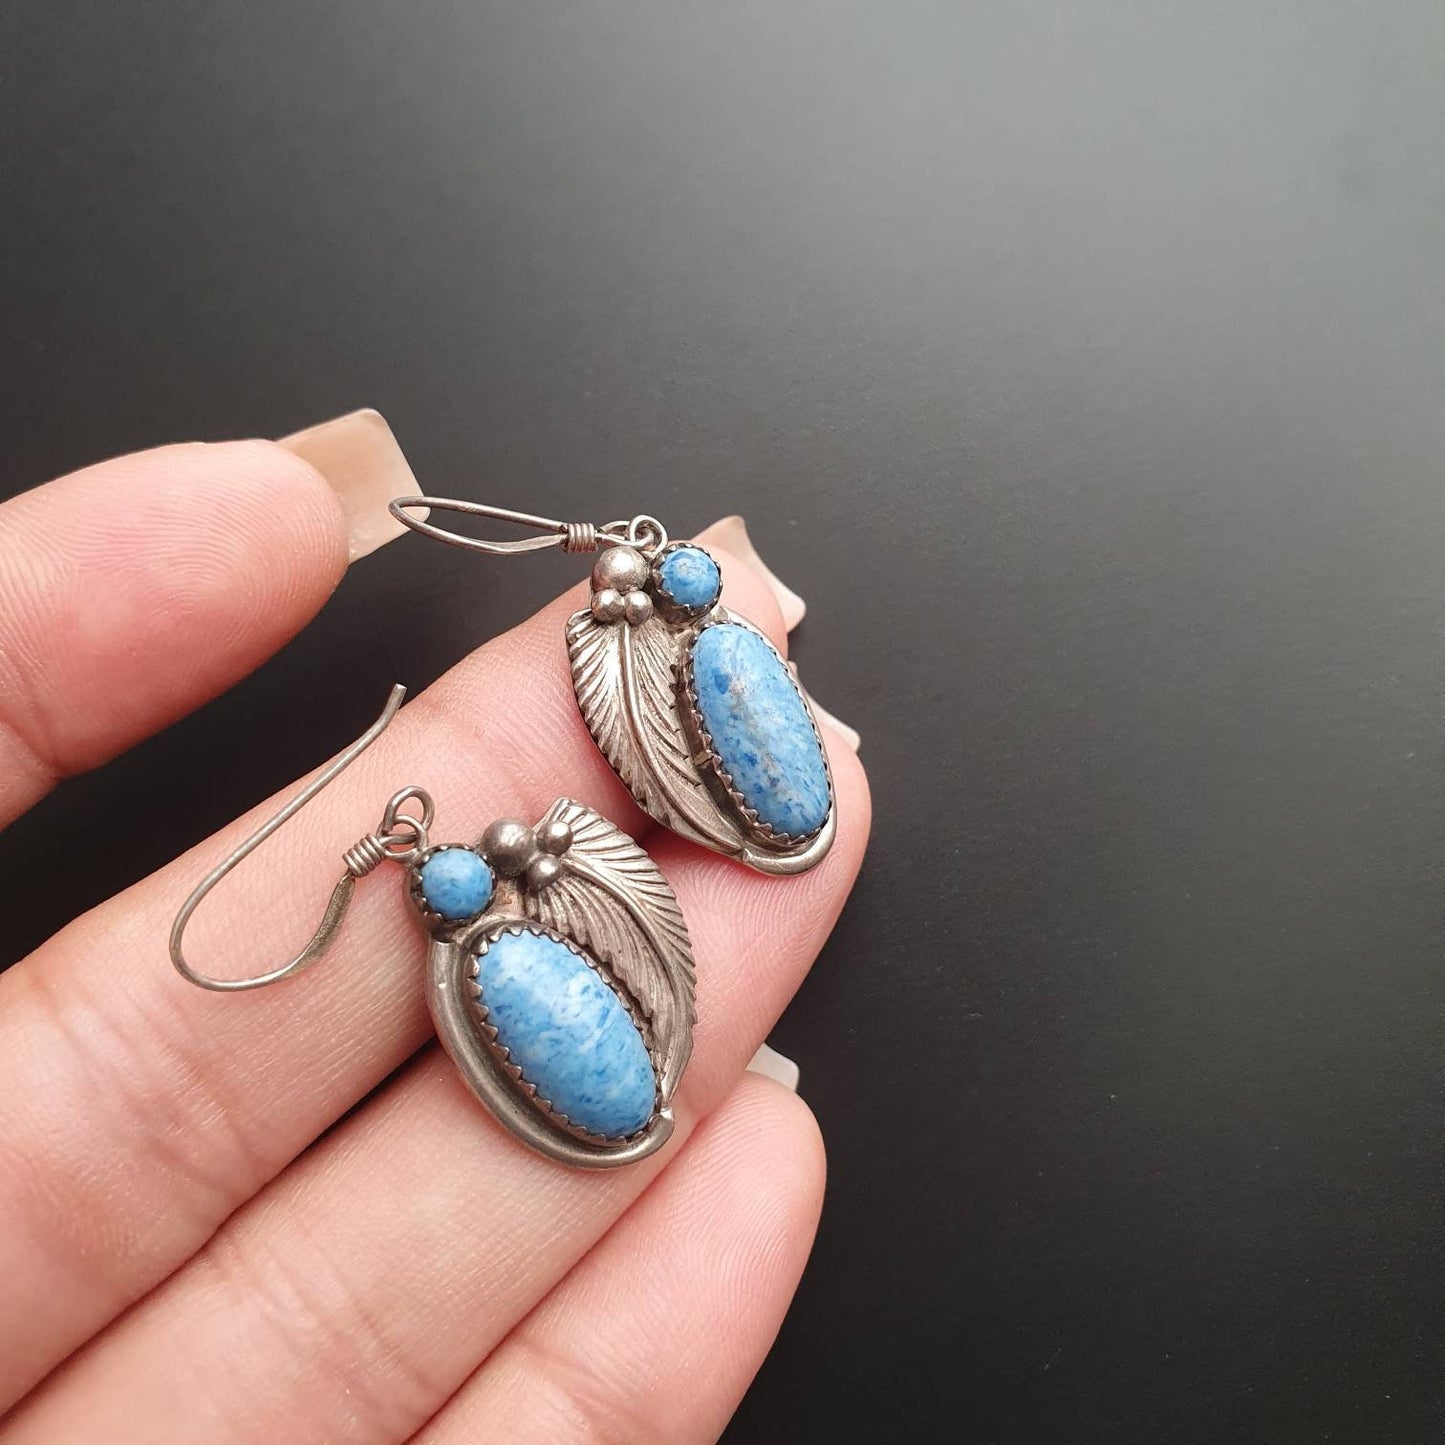 Navajo,Native American, Sterling Silver,Turquoise Earrings. Leaf and hogan, dangle earrings, gifts, unique, rare, 925,silver, earrings,